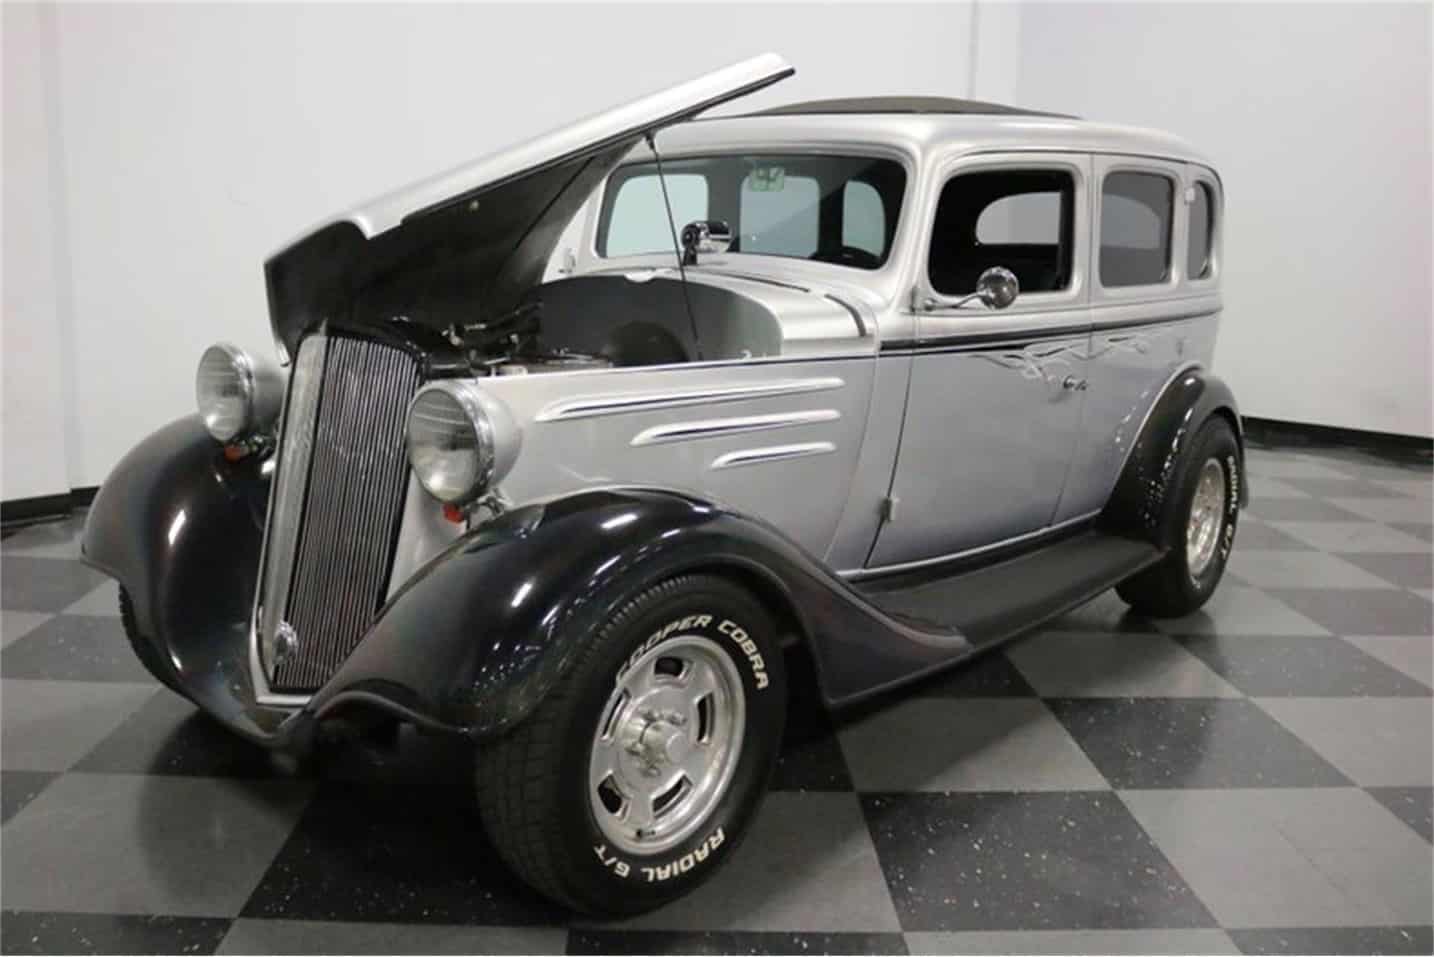 1935 Chevrolet Master, Master of the universe? 4-door street rod has style (and air conditioning), ClassicCars.com Journal